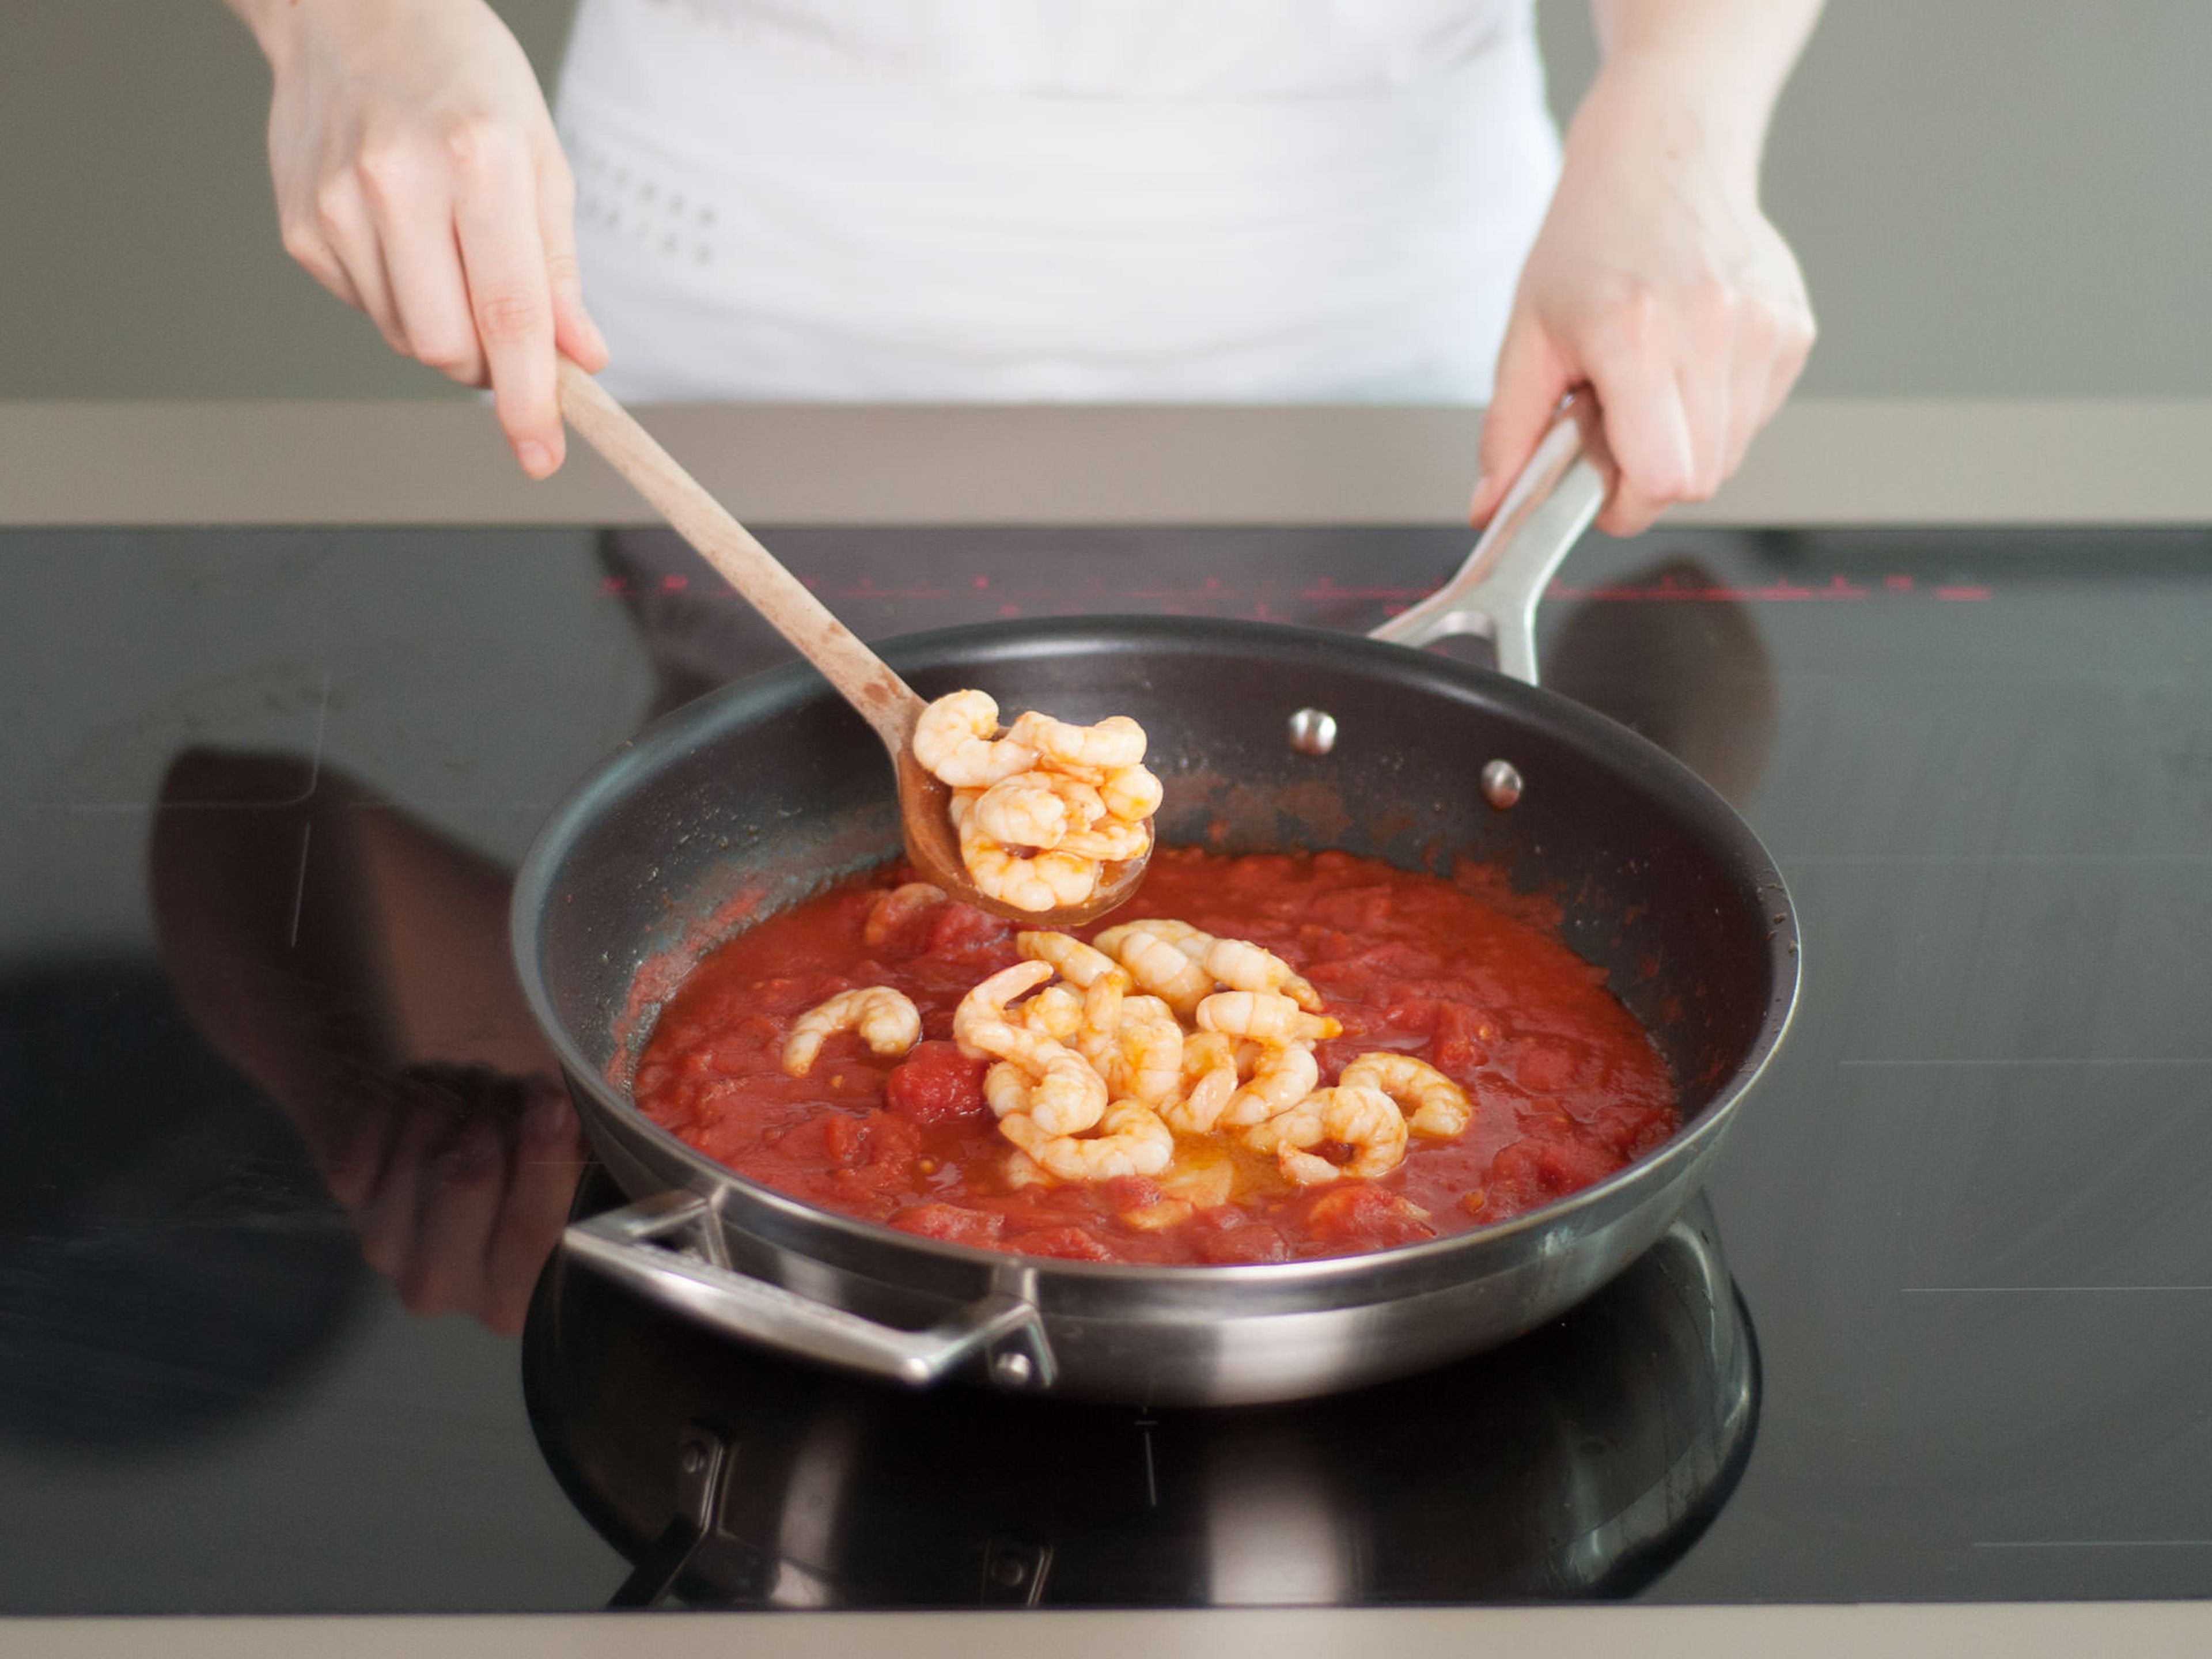 Transfer shrimp and their juices to a bowl, then add crushed tomatoes to the skillet, along with garlic and salt to taste. Cook over medium heat until hot. Turn heat down to low, return shrimp to skillet, and cover while you cook polenta.